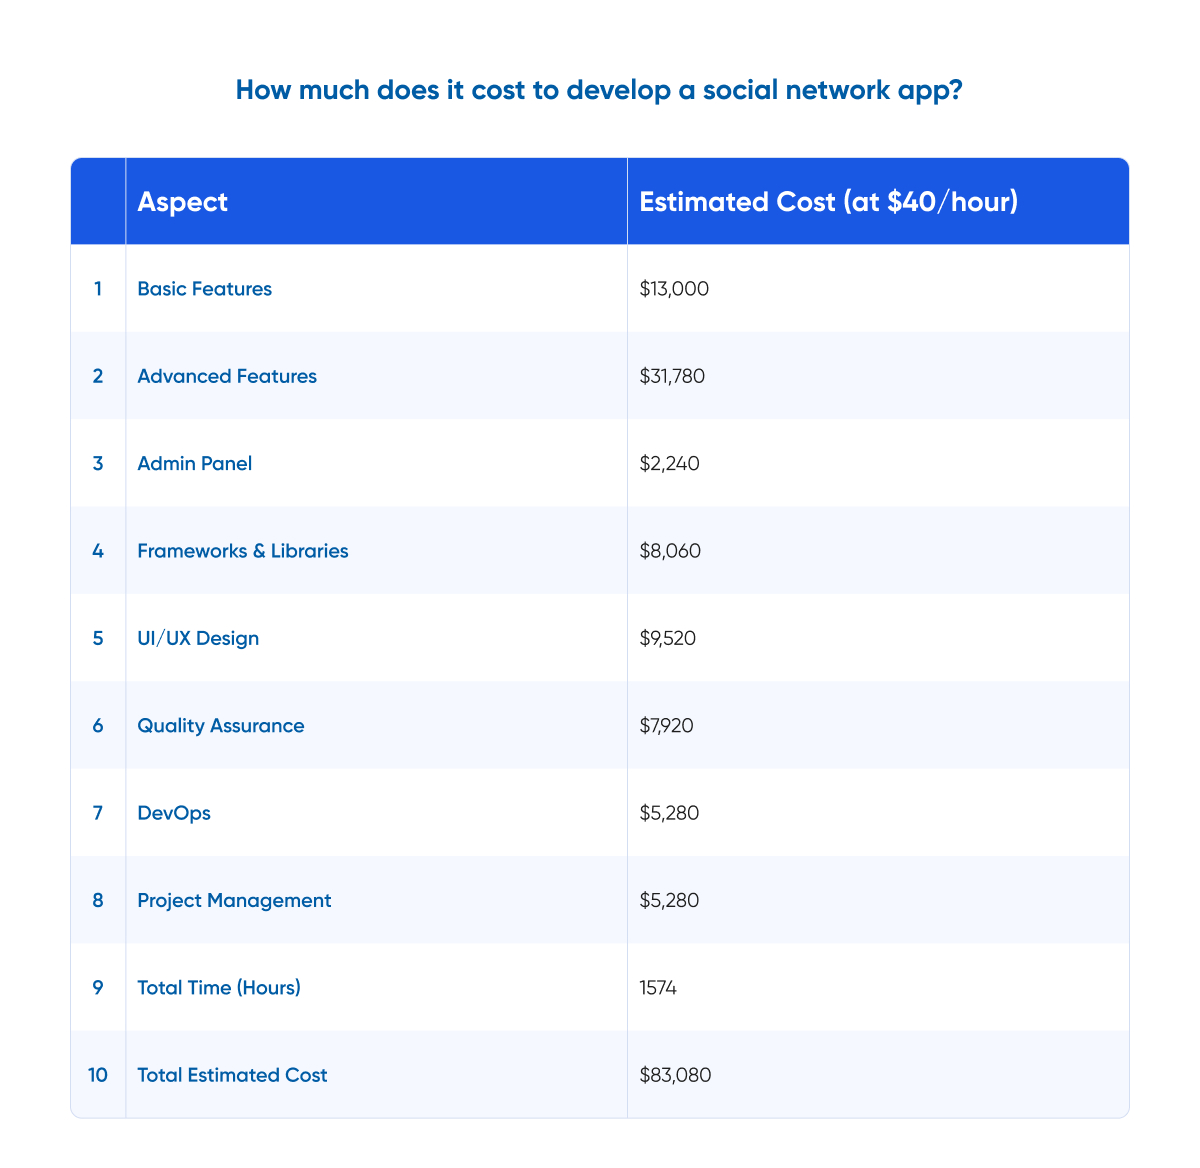 the average cost for developing a social network app